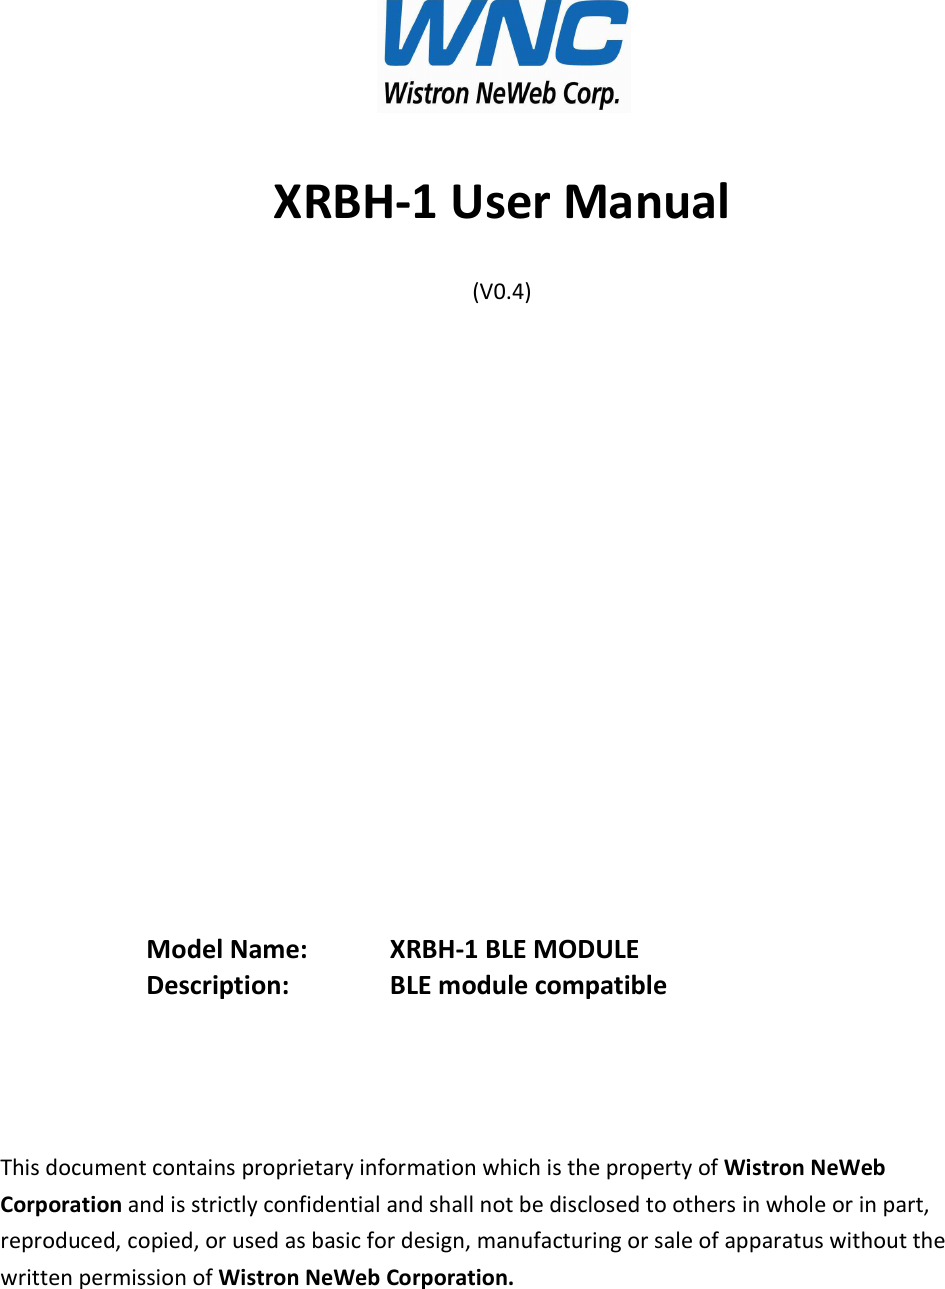  XRBH-1 User Manual (V0.4)                  Model Name:     XRBH-1 BLE MODULE Description:     BLE module compatible     This document contains proprietary information which is the property of Wistron NeWeb Corporation and is strictly confidential and shall not be disclosed to others in whole or in part, reproduced, copied, or used as basic for design, manufacturing or sale of apparatus without the written permission of Wistron NeWeb Corporation.  